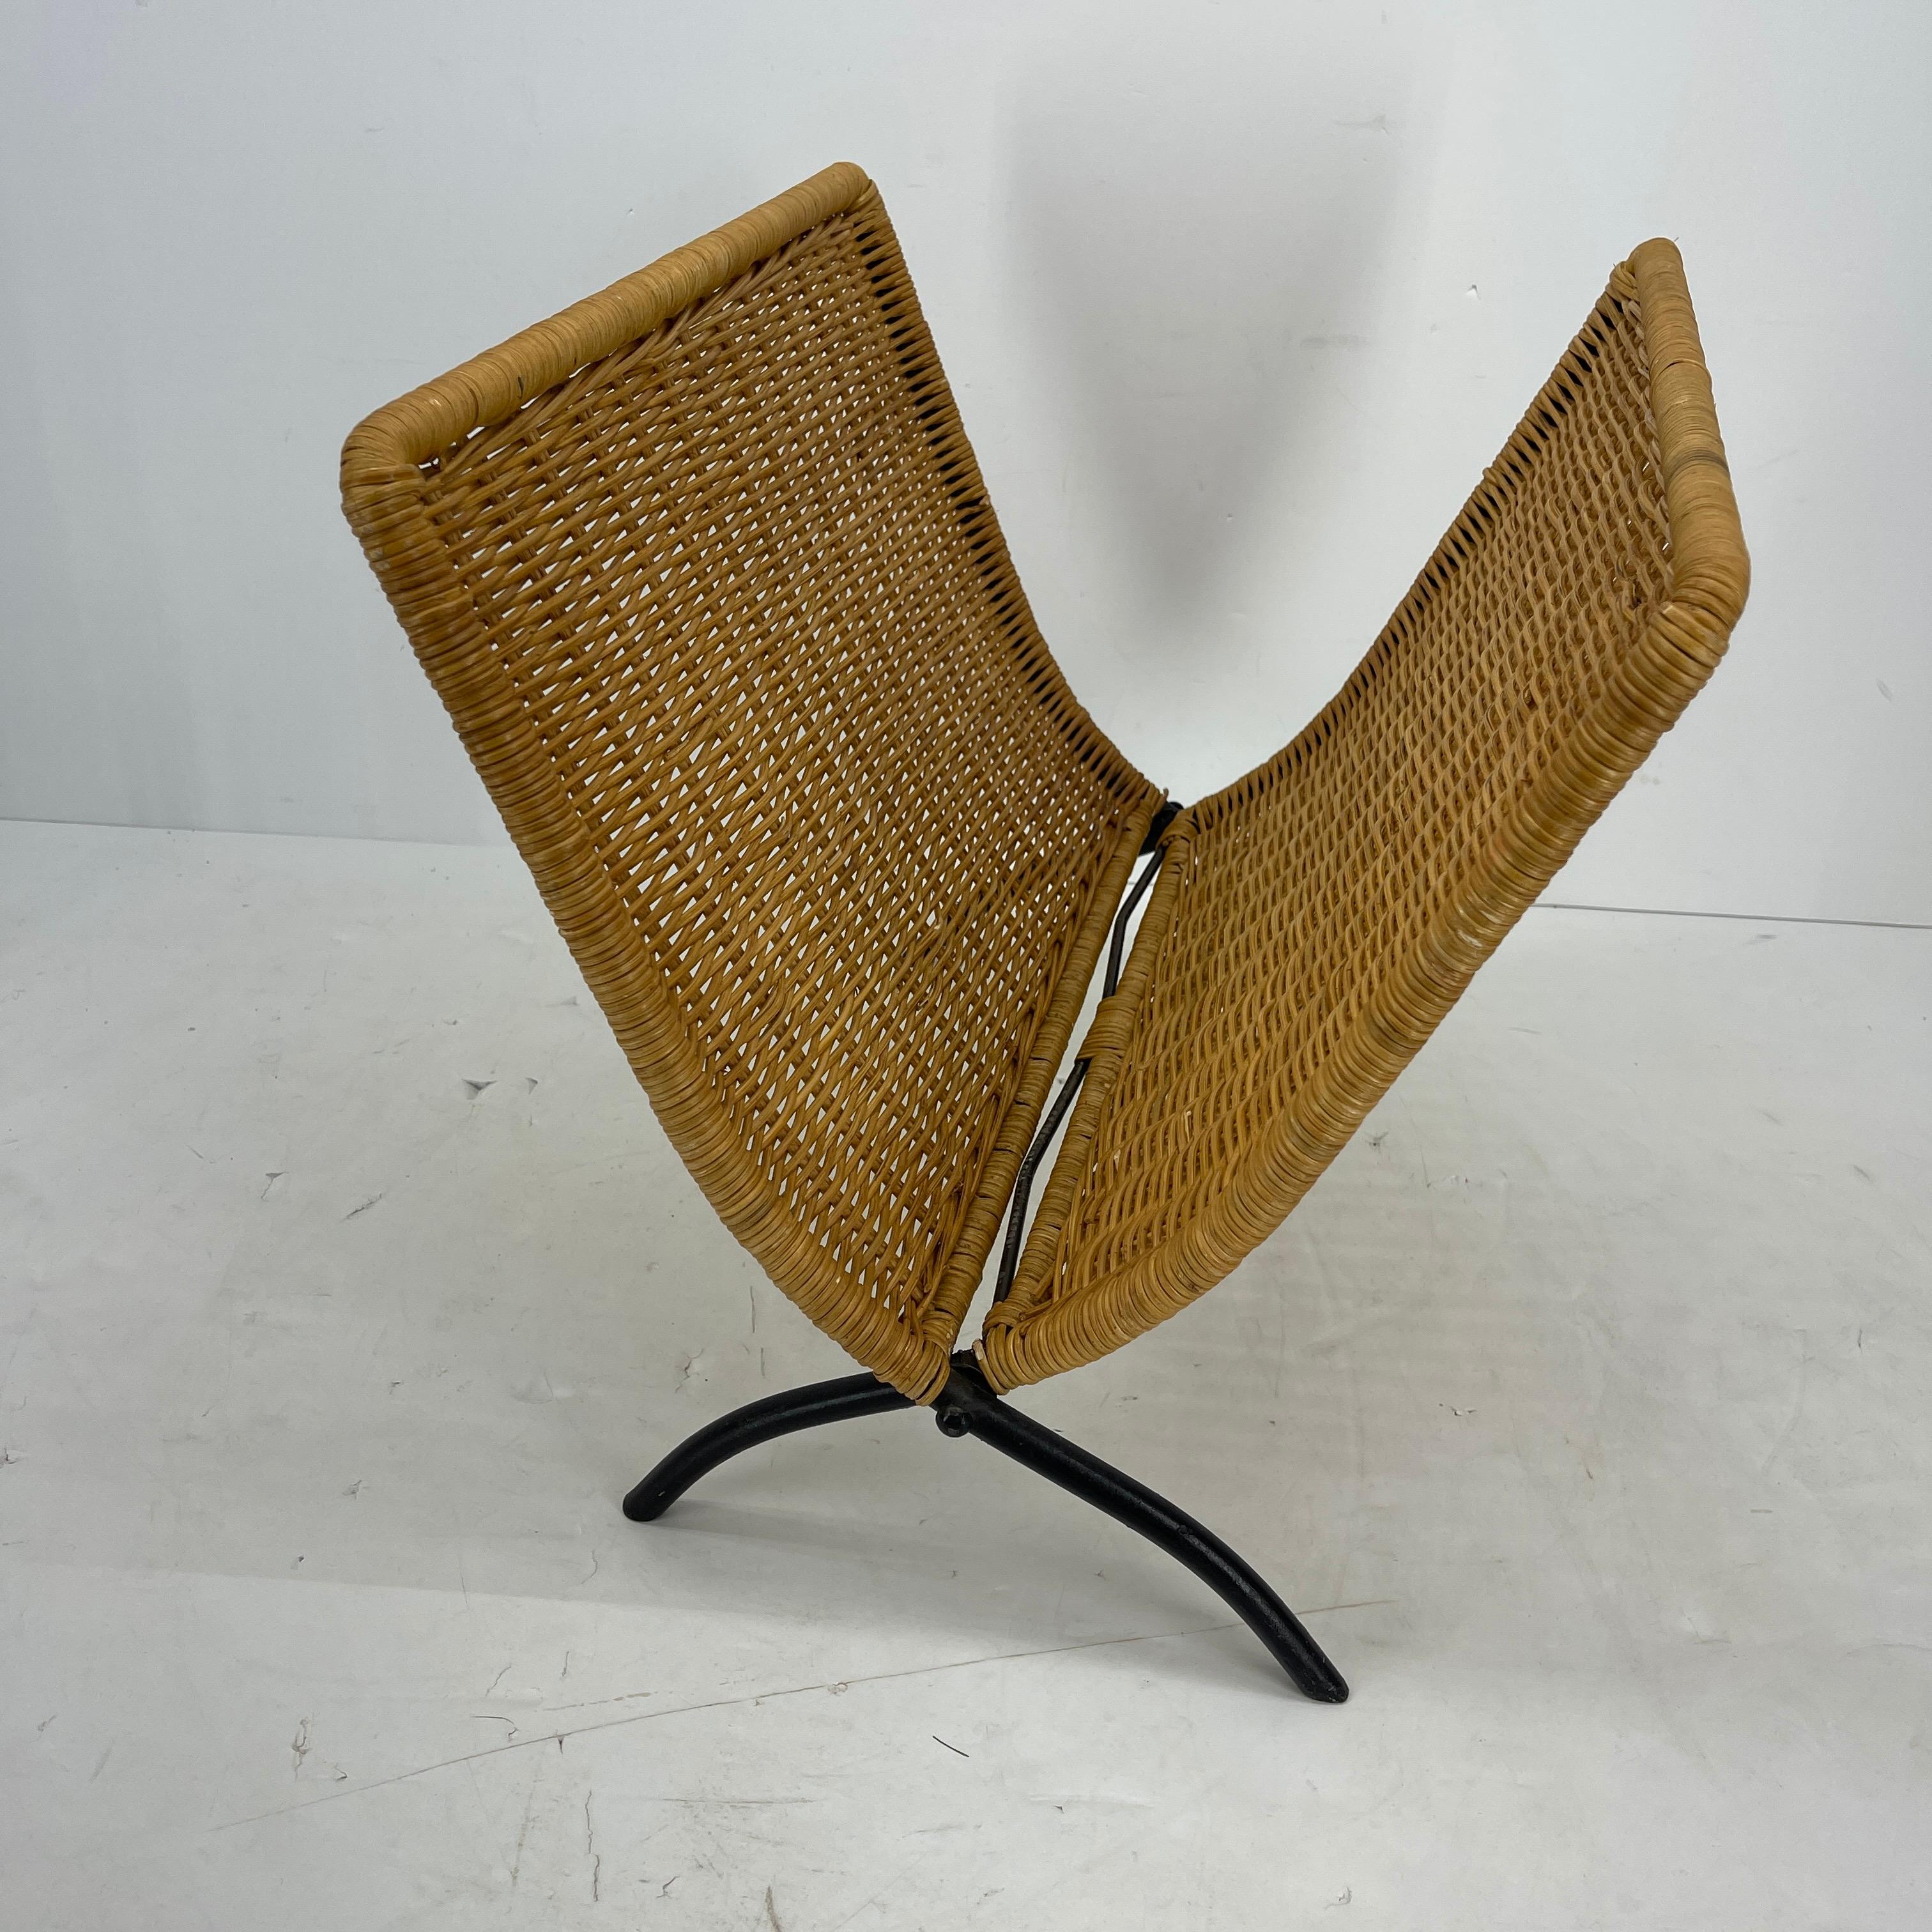 French Wicker Magazine Rack with Black Metal Feet, Jacques Adnet, Mid-Century Modern